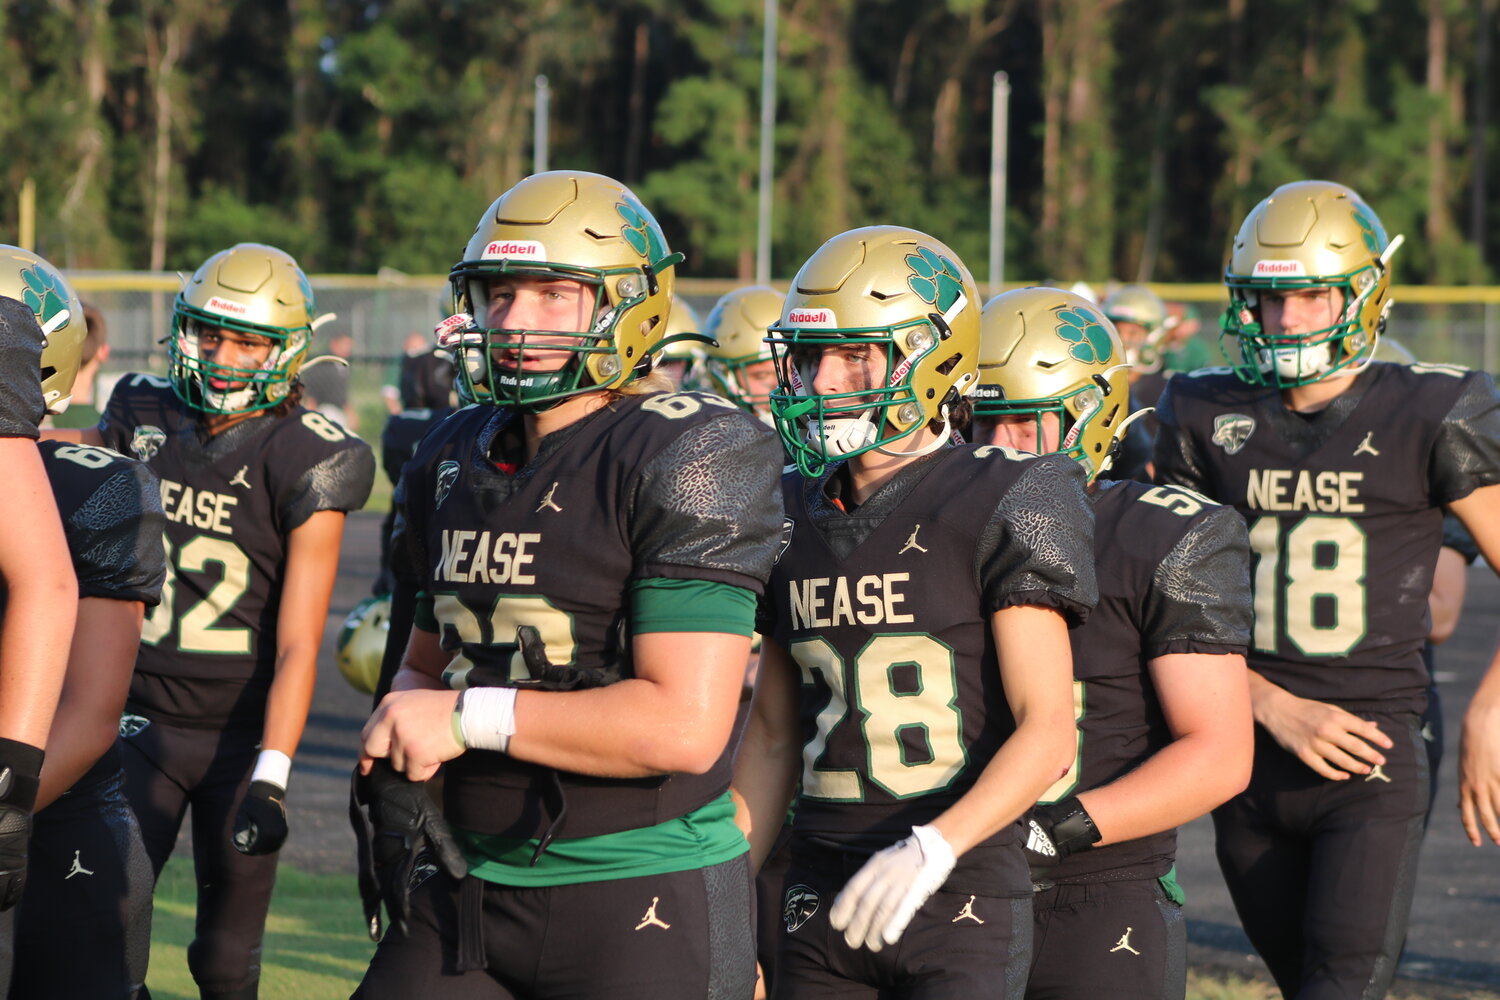 Nease lost a county battle to visiting Creekside 51-23 in week two.